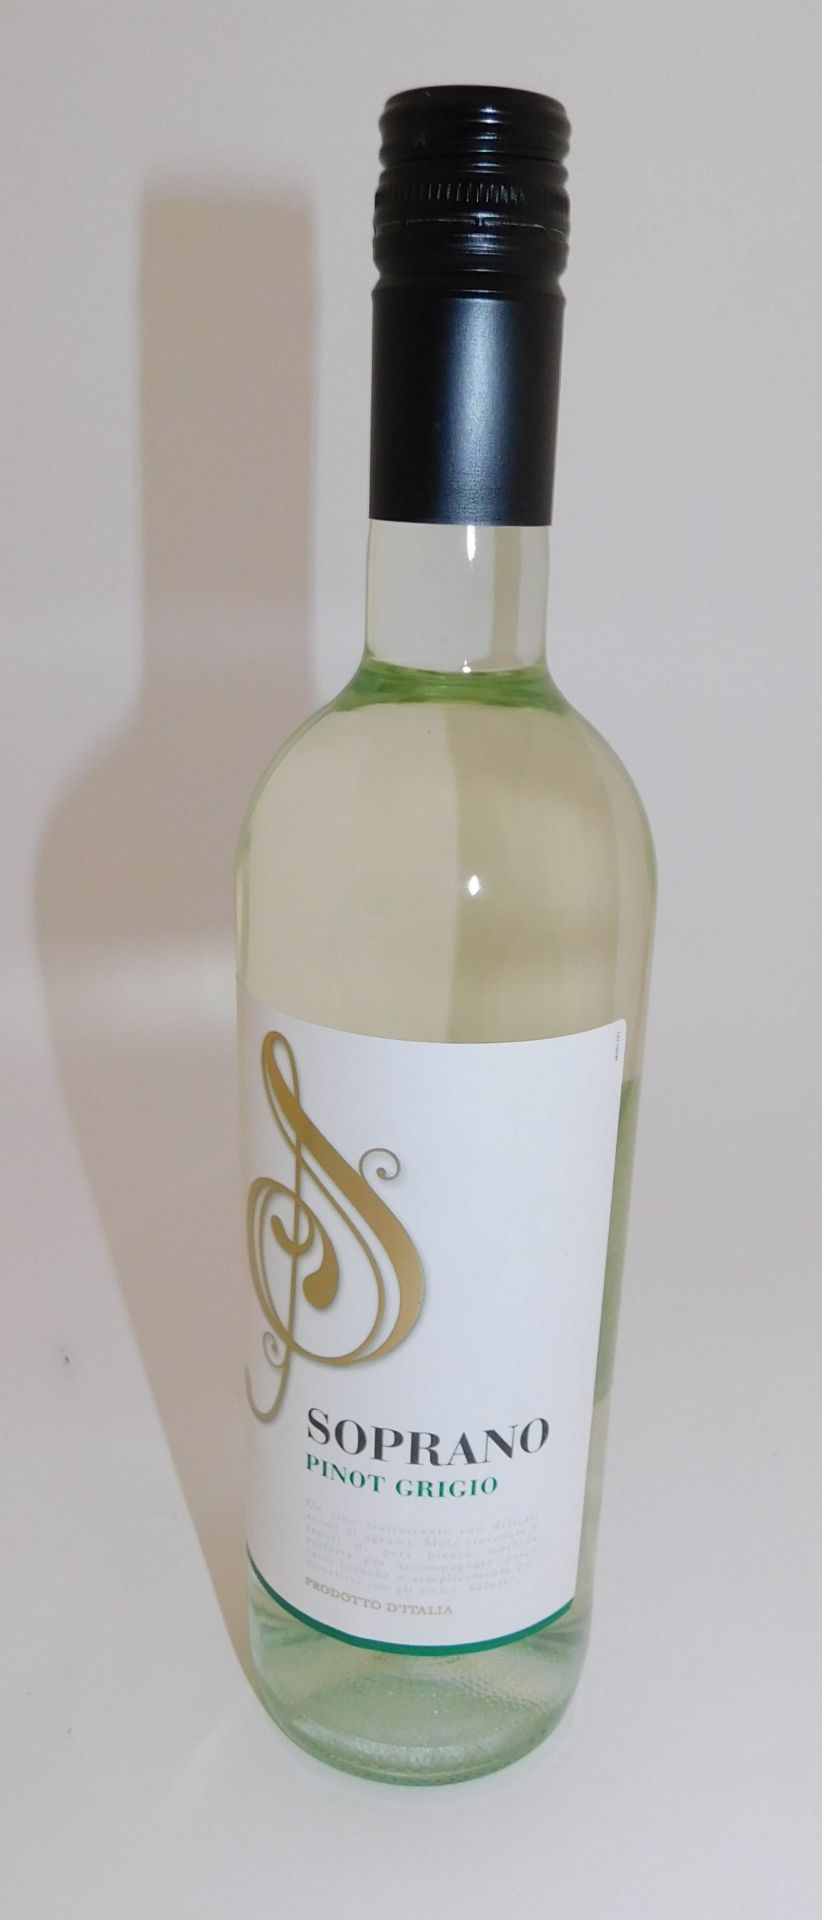 23 Bottles of Soprano Pinot Grigio, 75cl (Located Stockport – See General Notes for More Details)